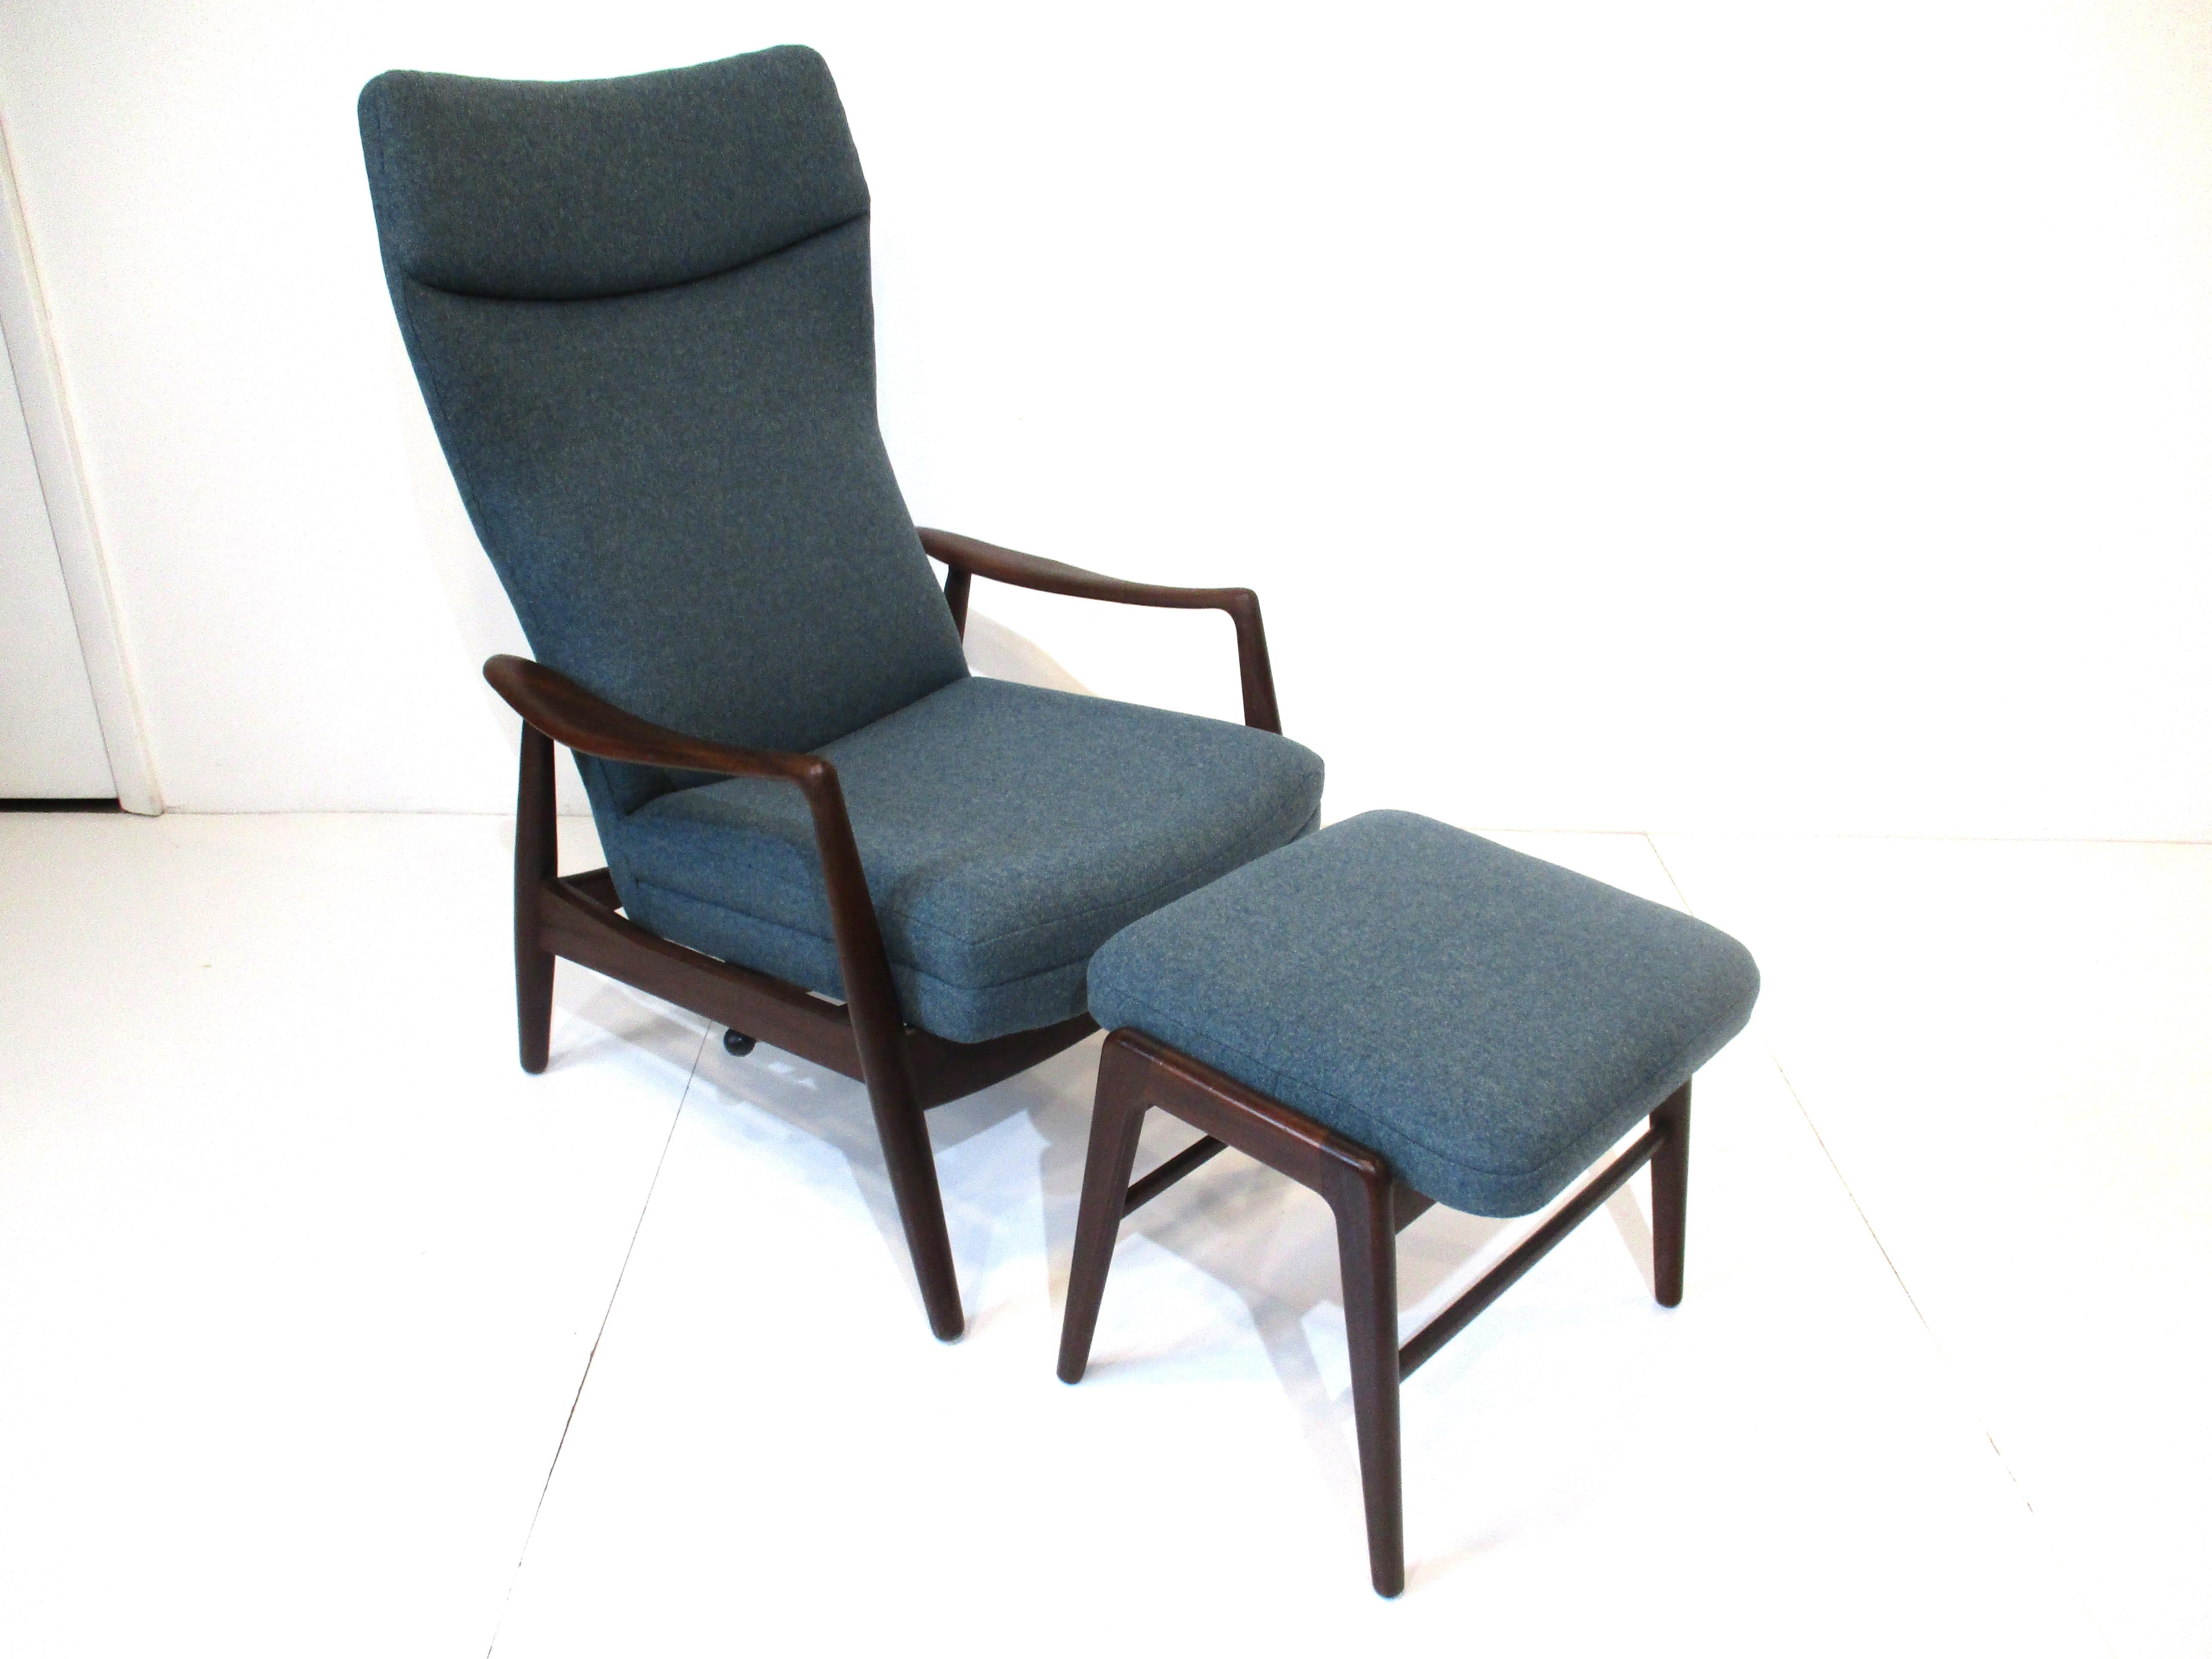 A finely crafted dark teak wood framed lounge chair with sculptural armrests and winged styled backrest with matching ottoman reupholstered in a wool blend Danish steel gray blue fabric. One of the most comfortable lounge chairs we have had with